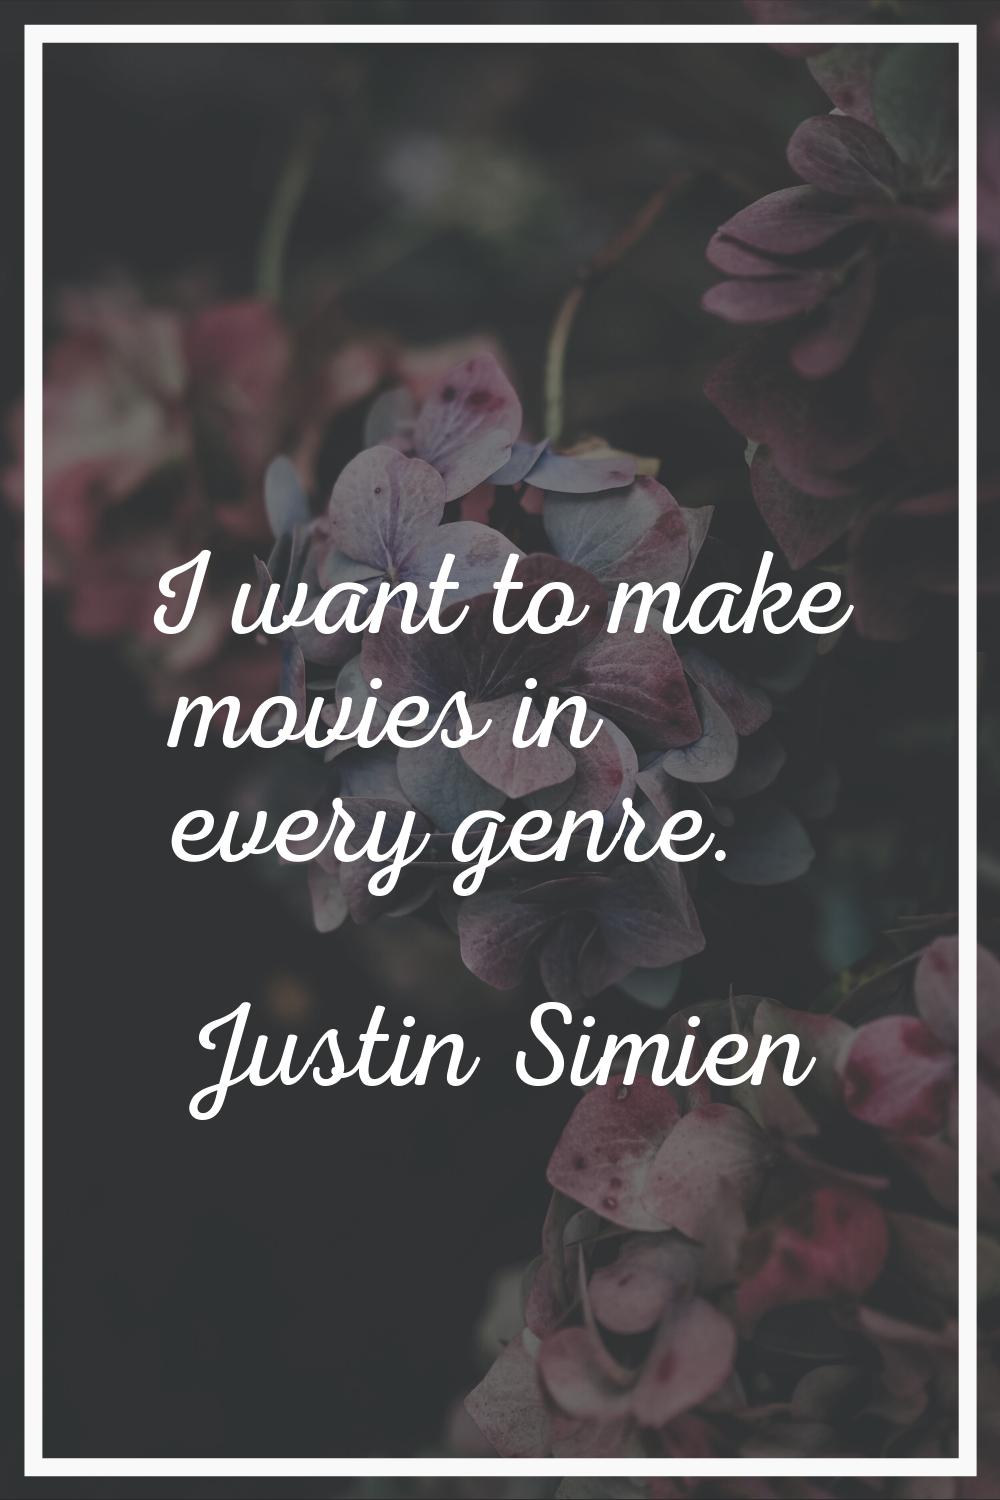 I want to make movies in every genre.